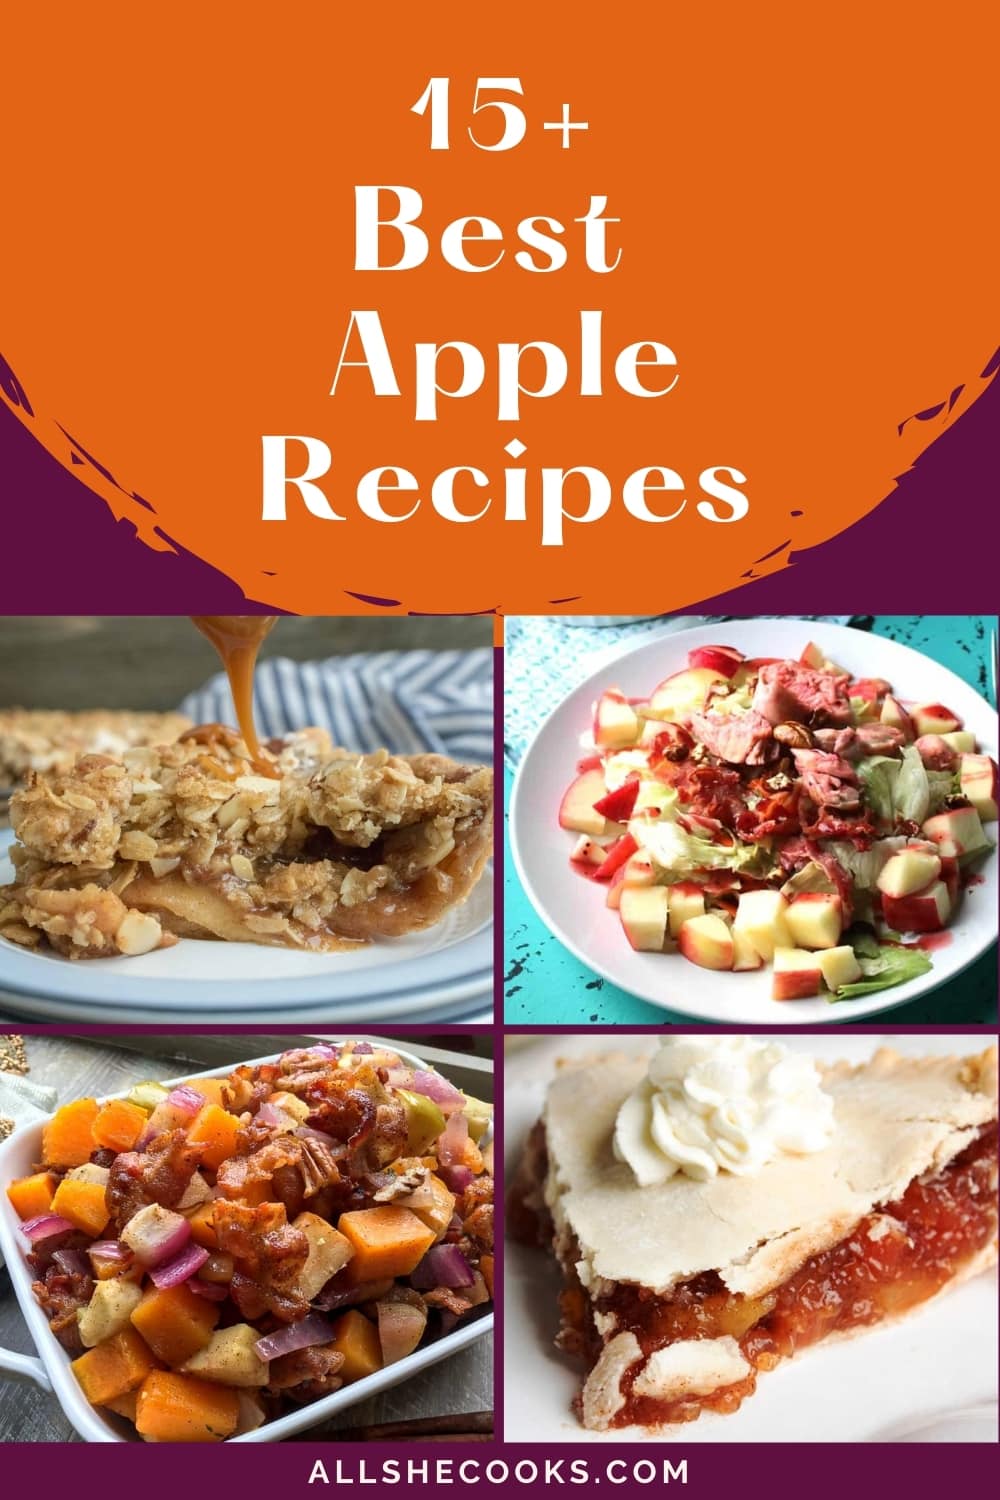 15+ Best Apple Recipes - Cakes, Pies, Butter, and More! - All She Cooks